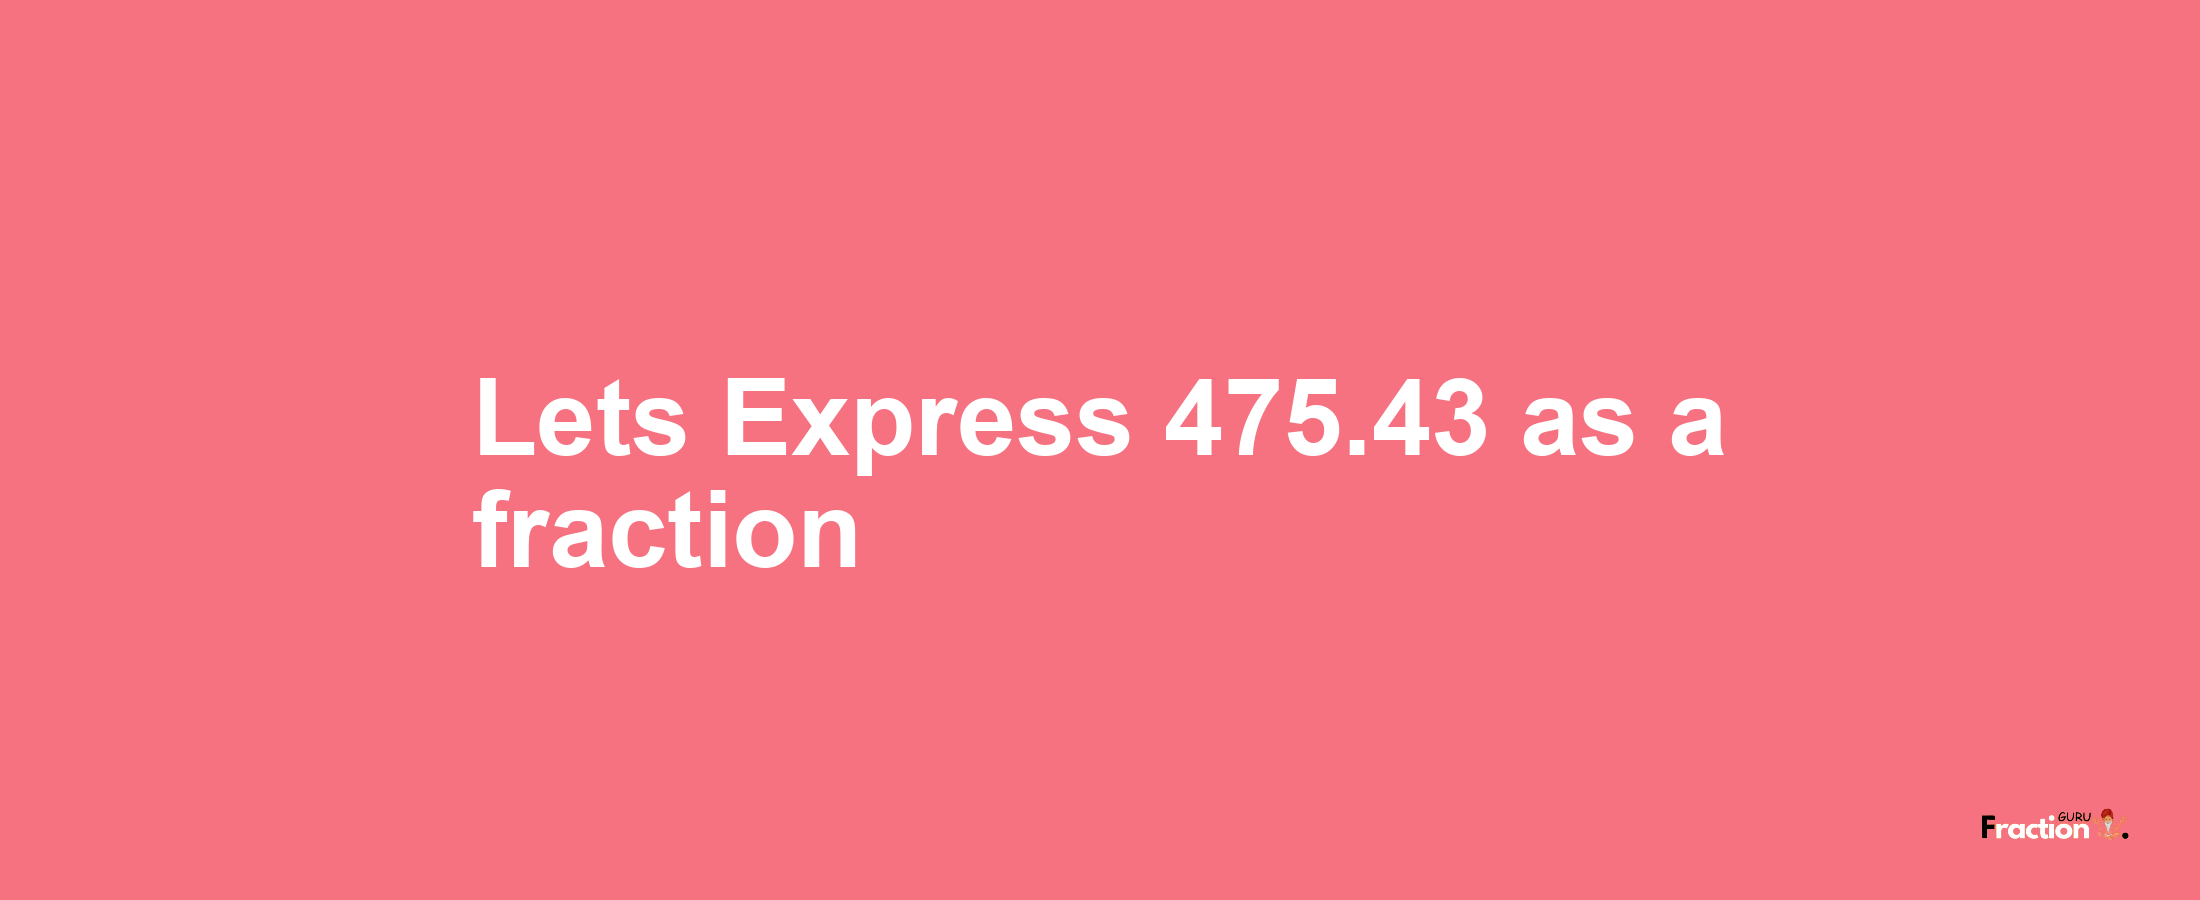 Lets Express 475.43 as afraction